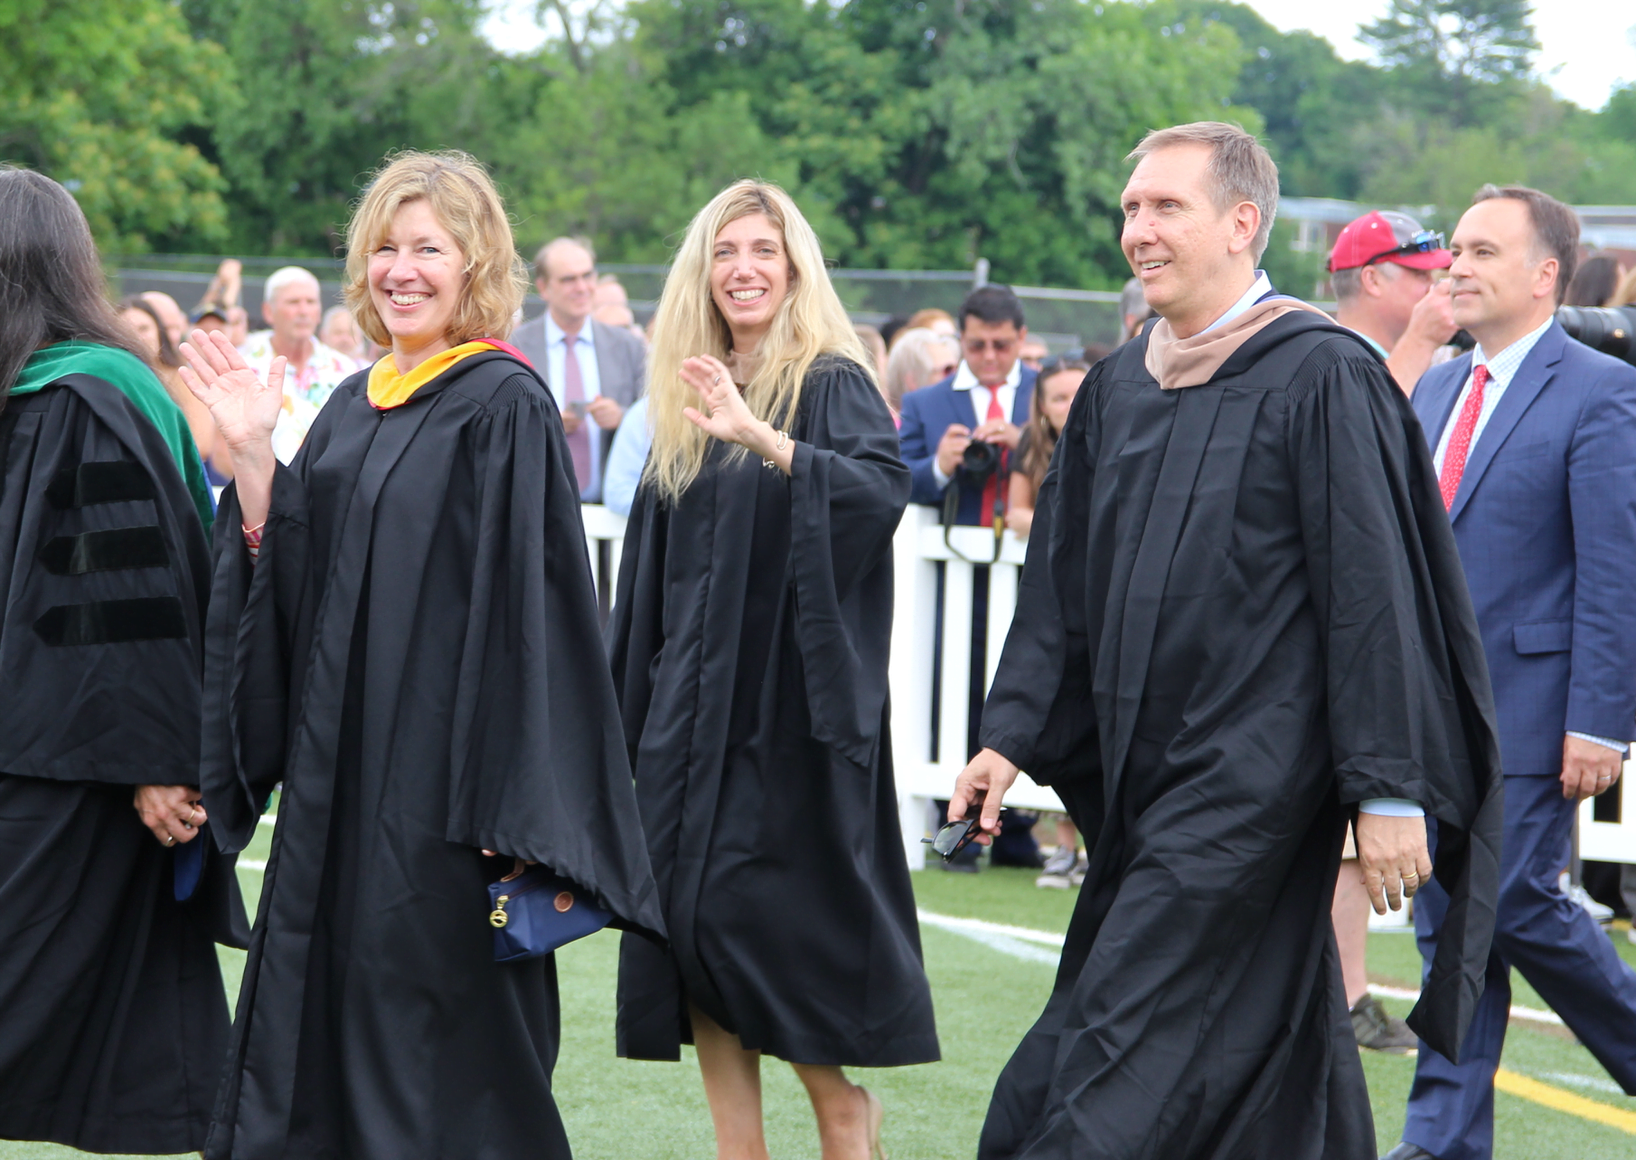 BOE members Lauren Raben, Kathleen Stowe and Peter Sherr at the GHS Class of 2019 graduation. June 17, 2019 Photo: Leslie Yager